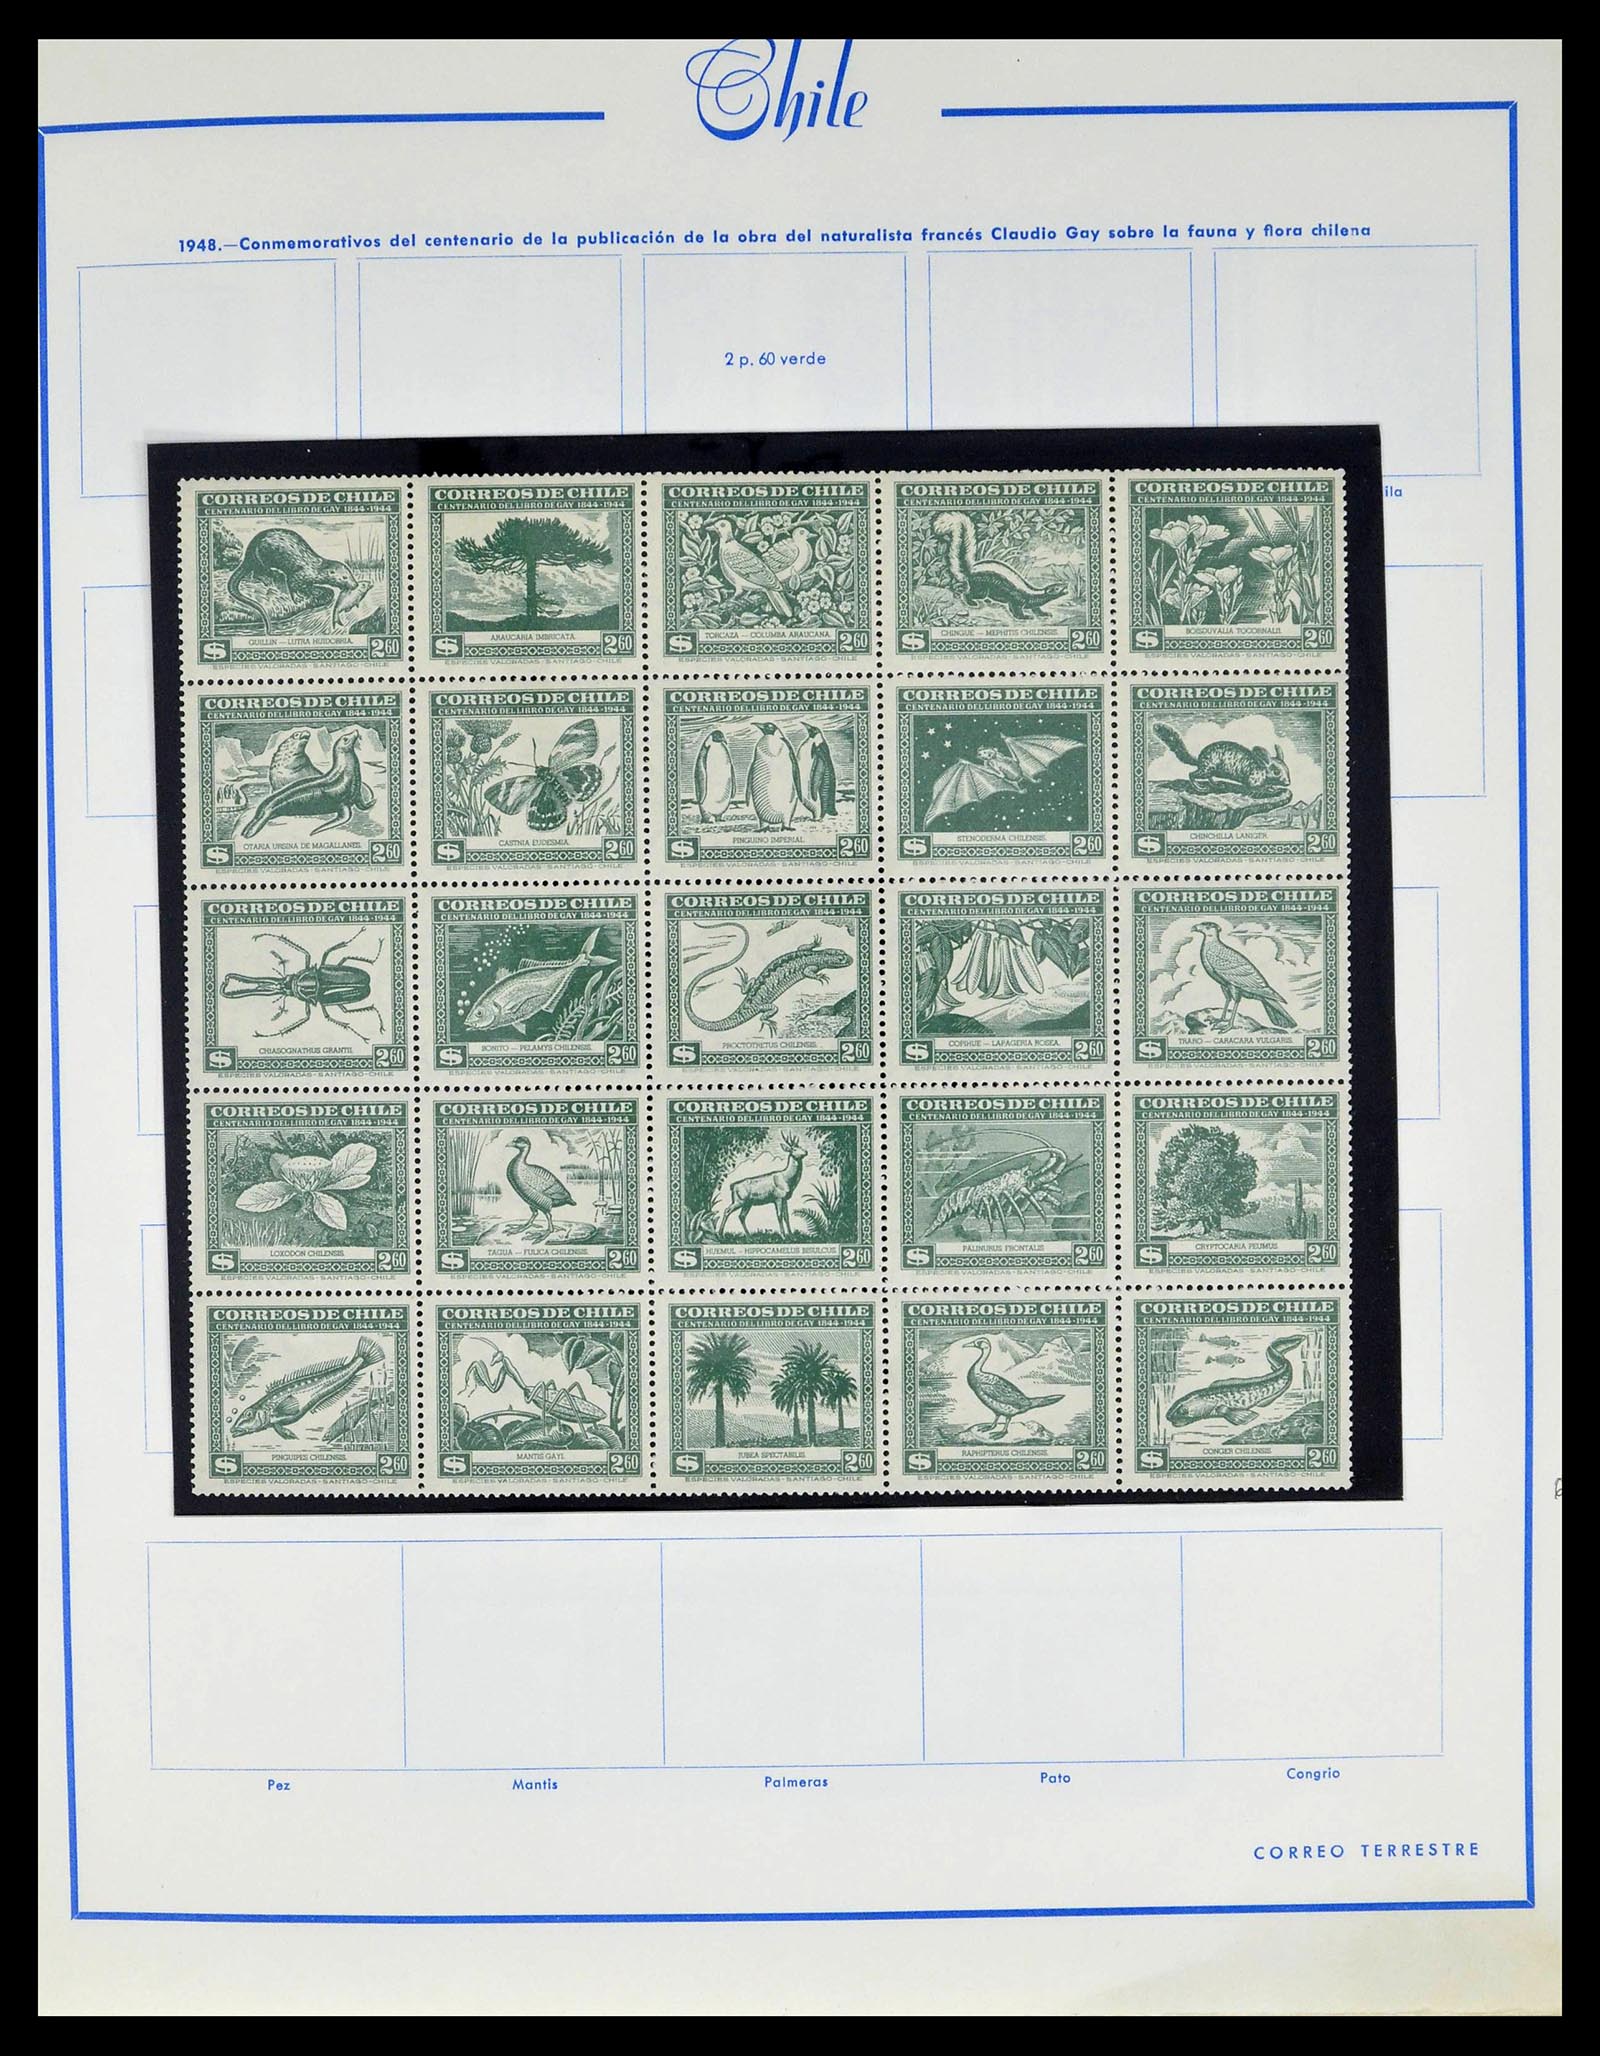 39213 0015 - Stamp collection 39213 Chile 1853-1970.